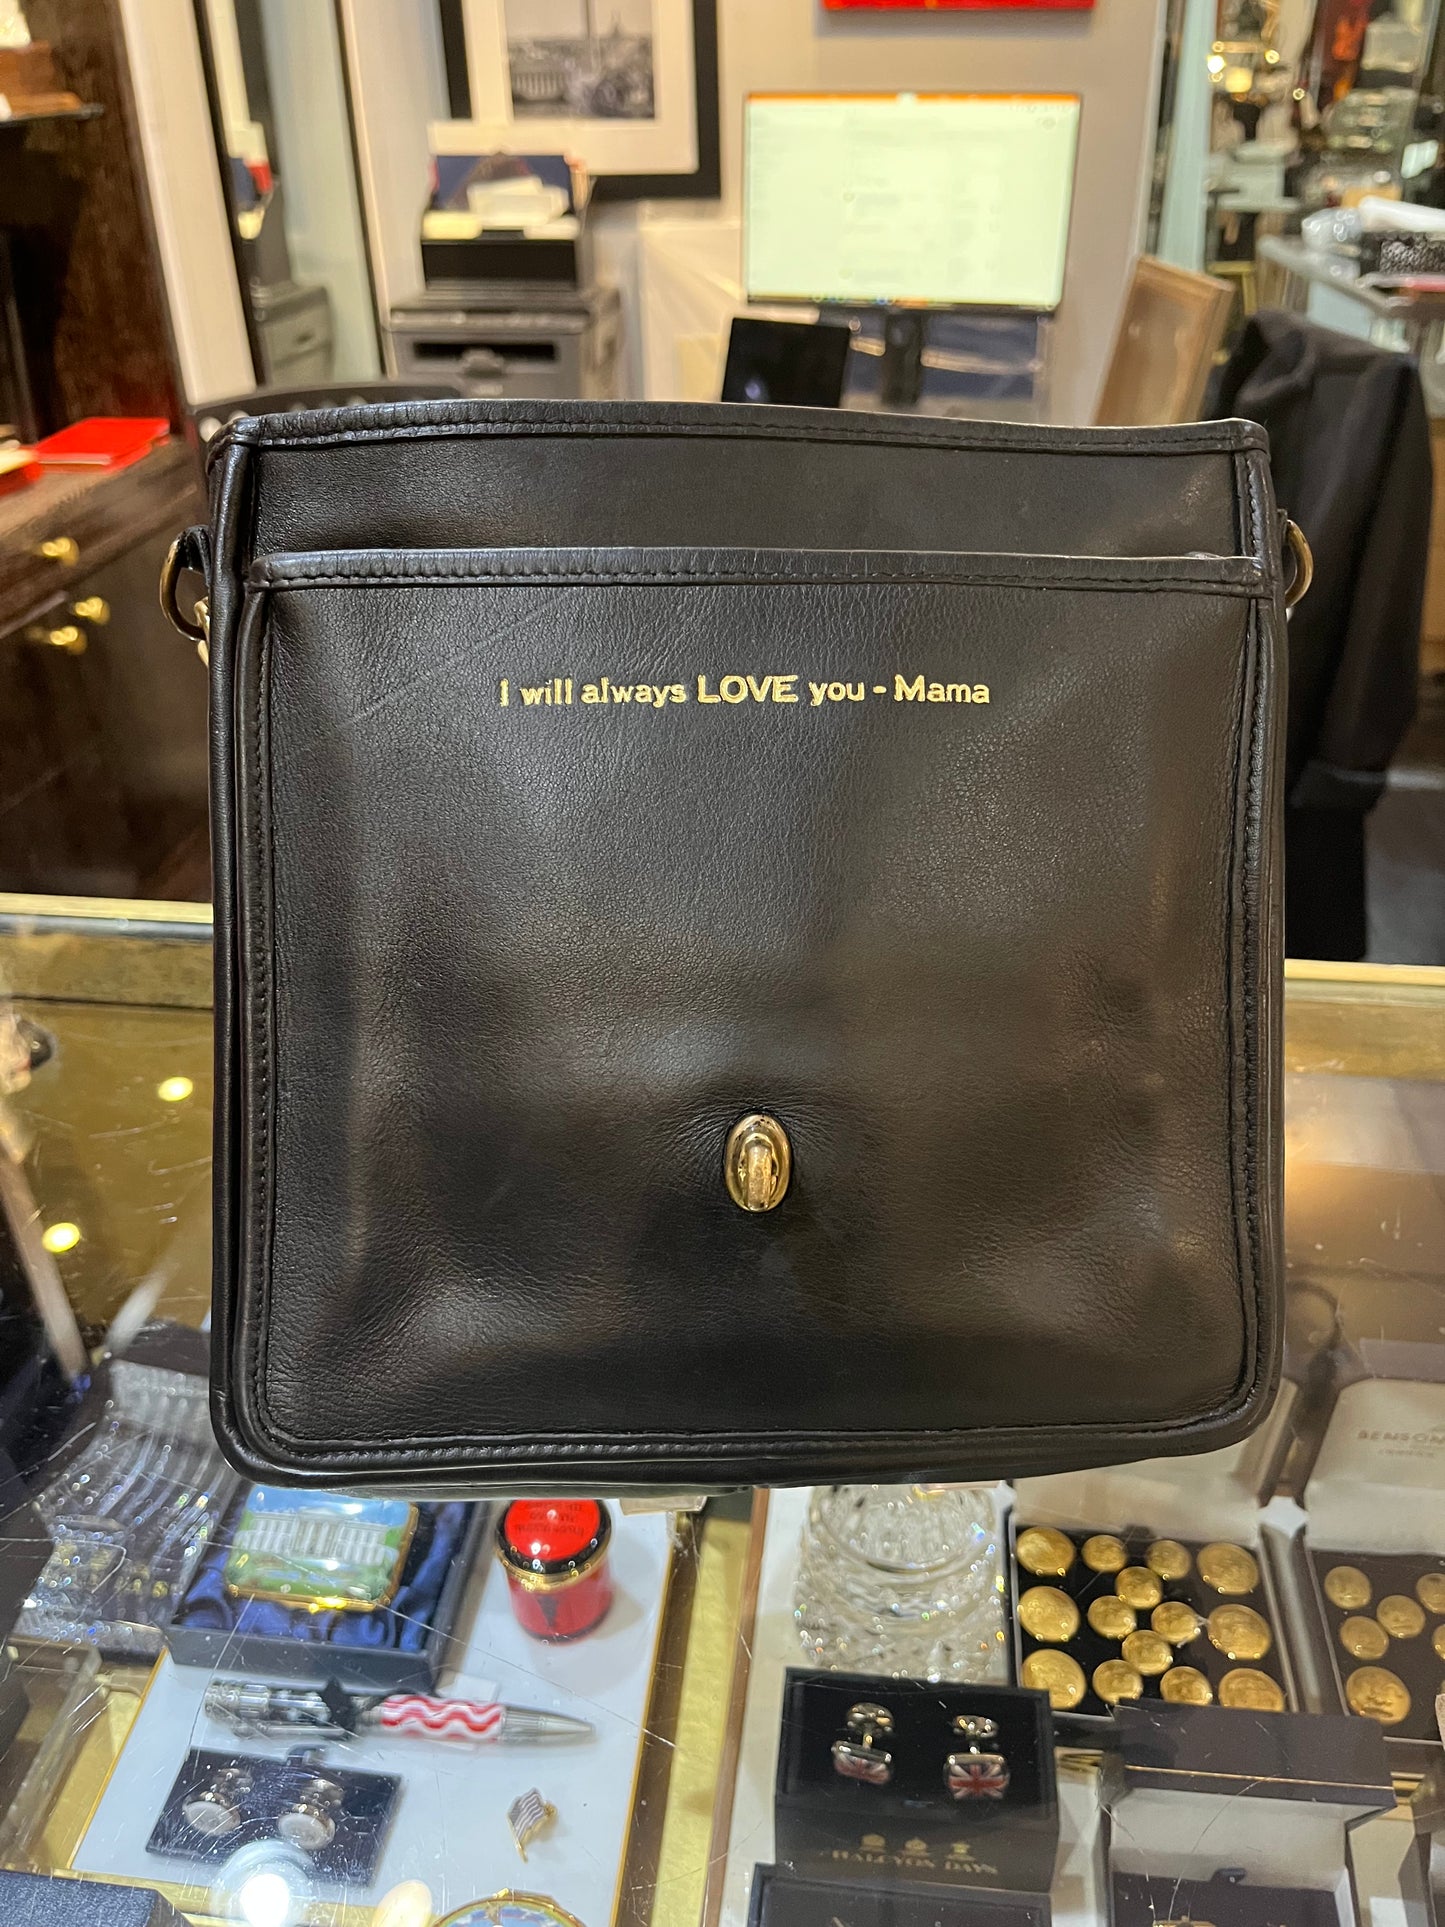 " Custom Stamping on Vintage Coach Bag - Gold Stamp - I will always LOVE you - Mama